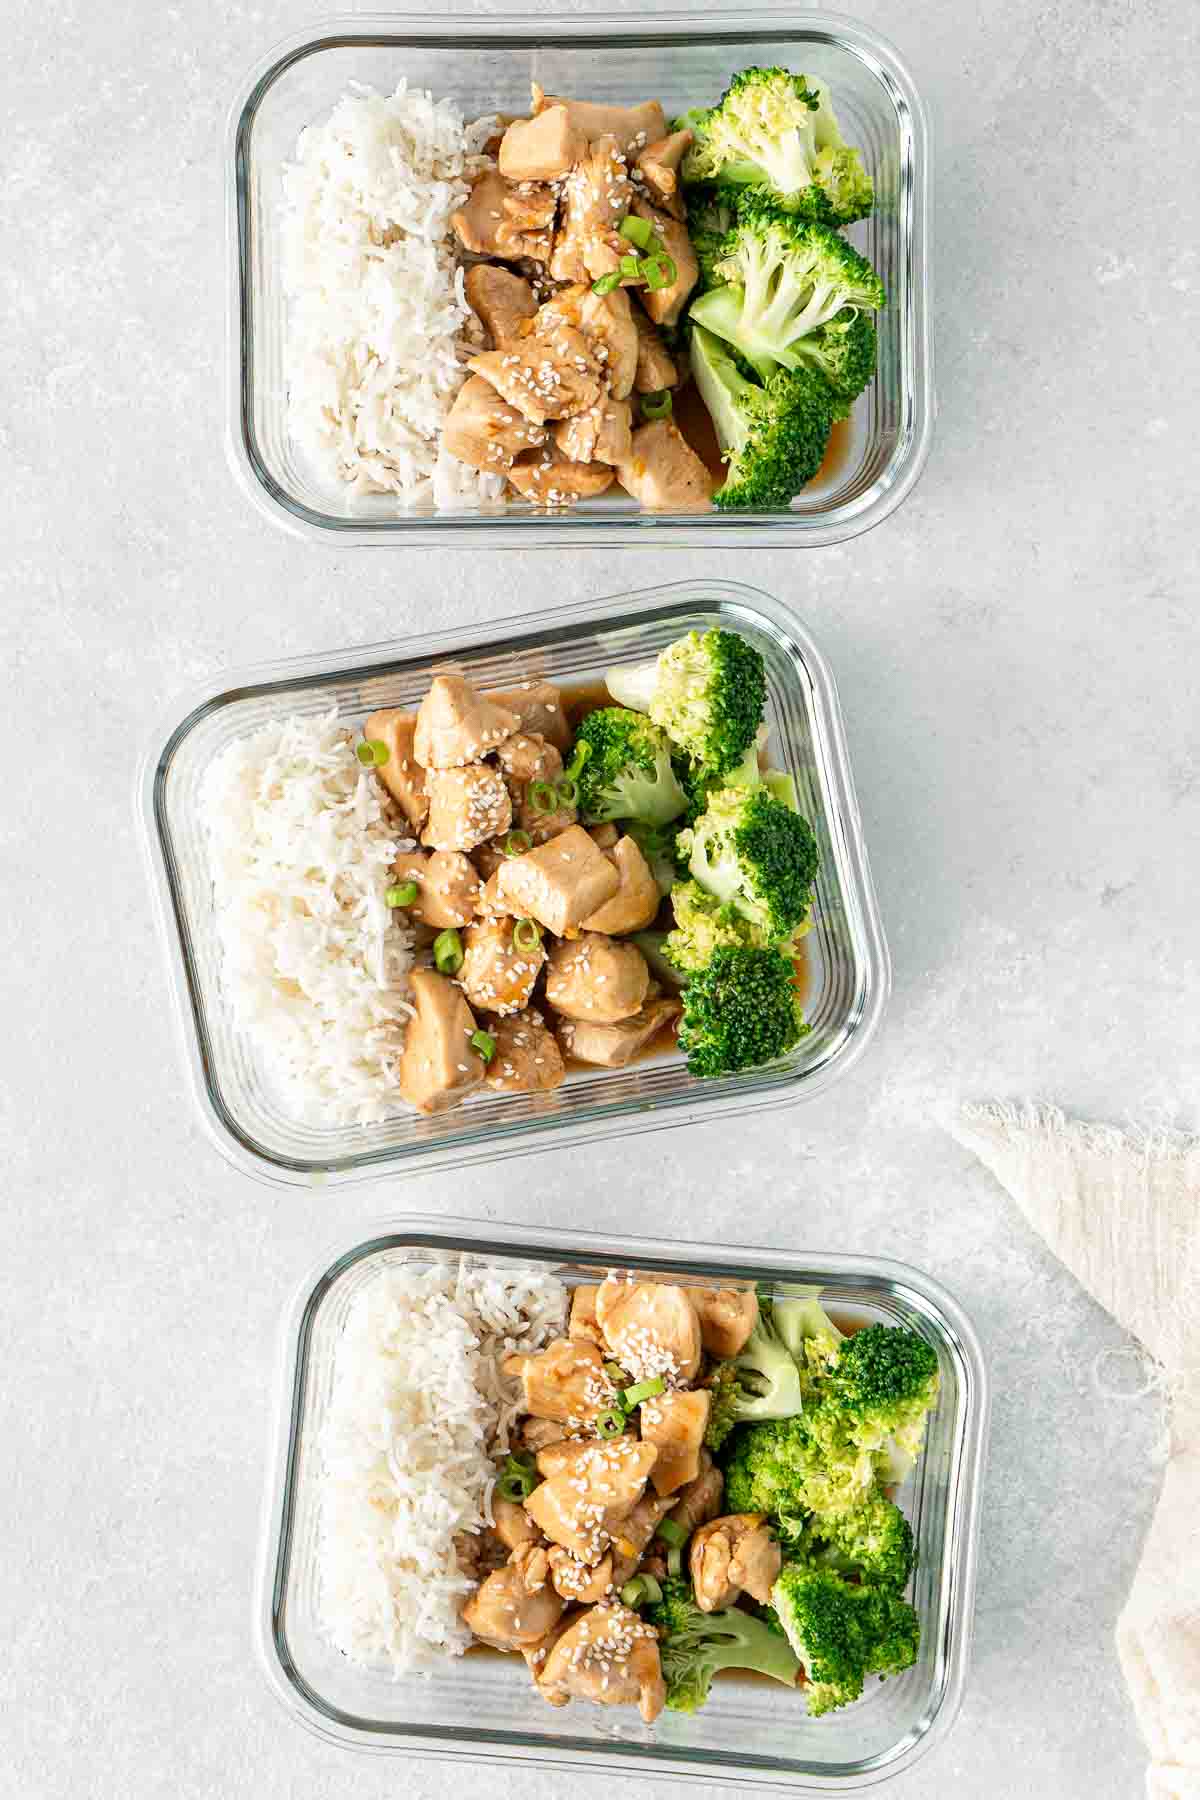 Three containers of Teriyaki chicken, broccoli and rice.